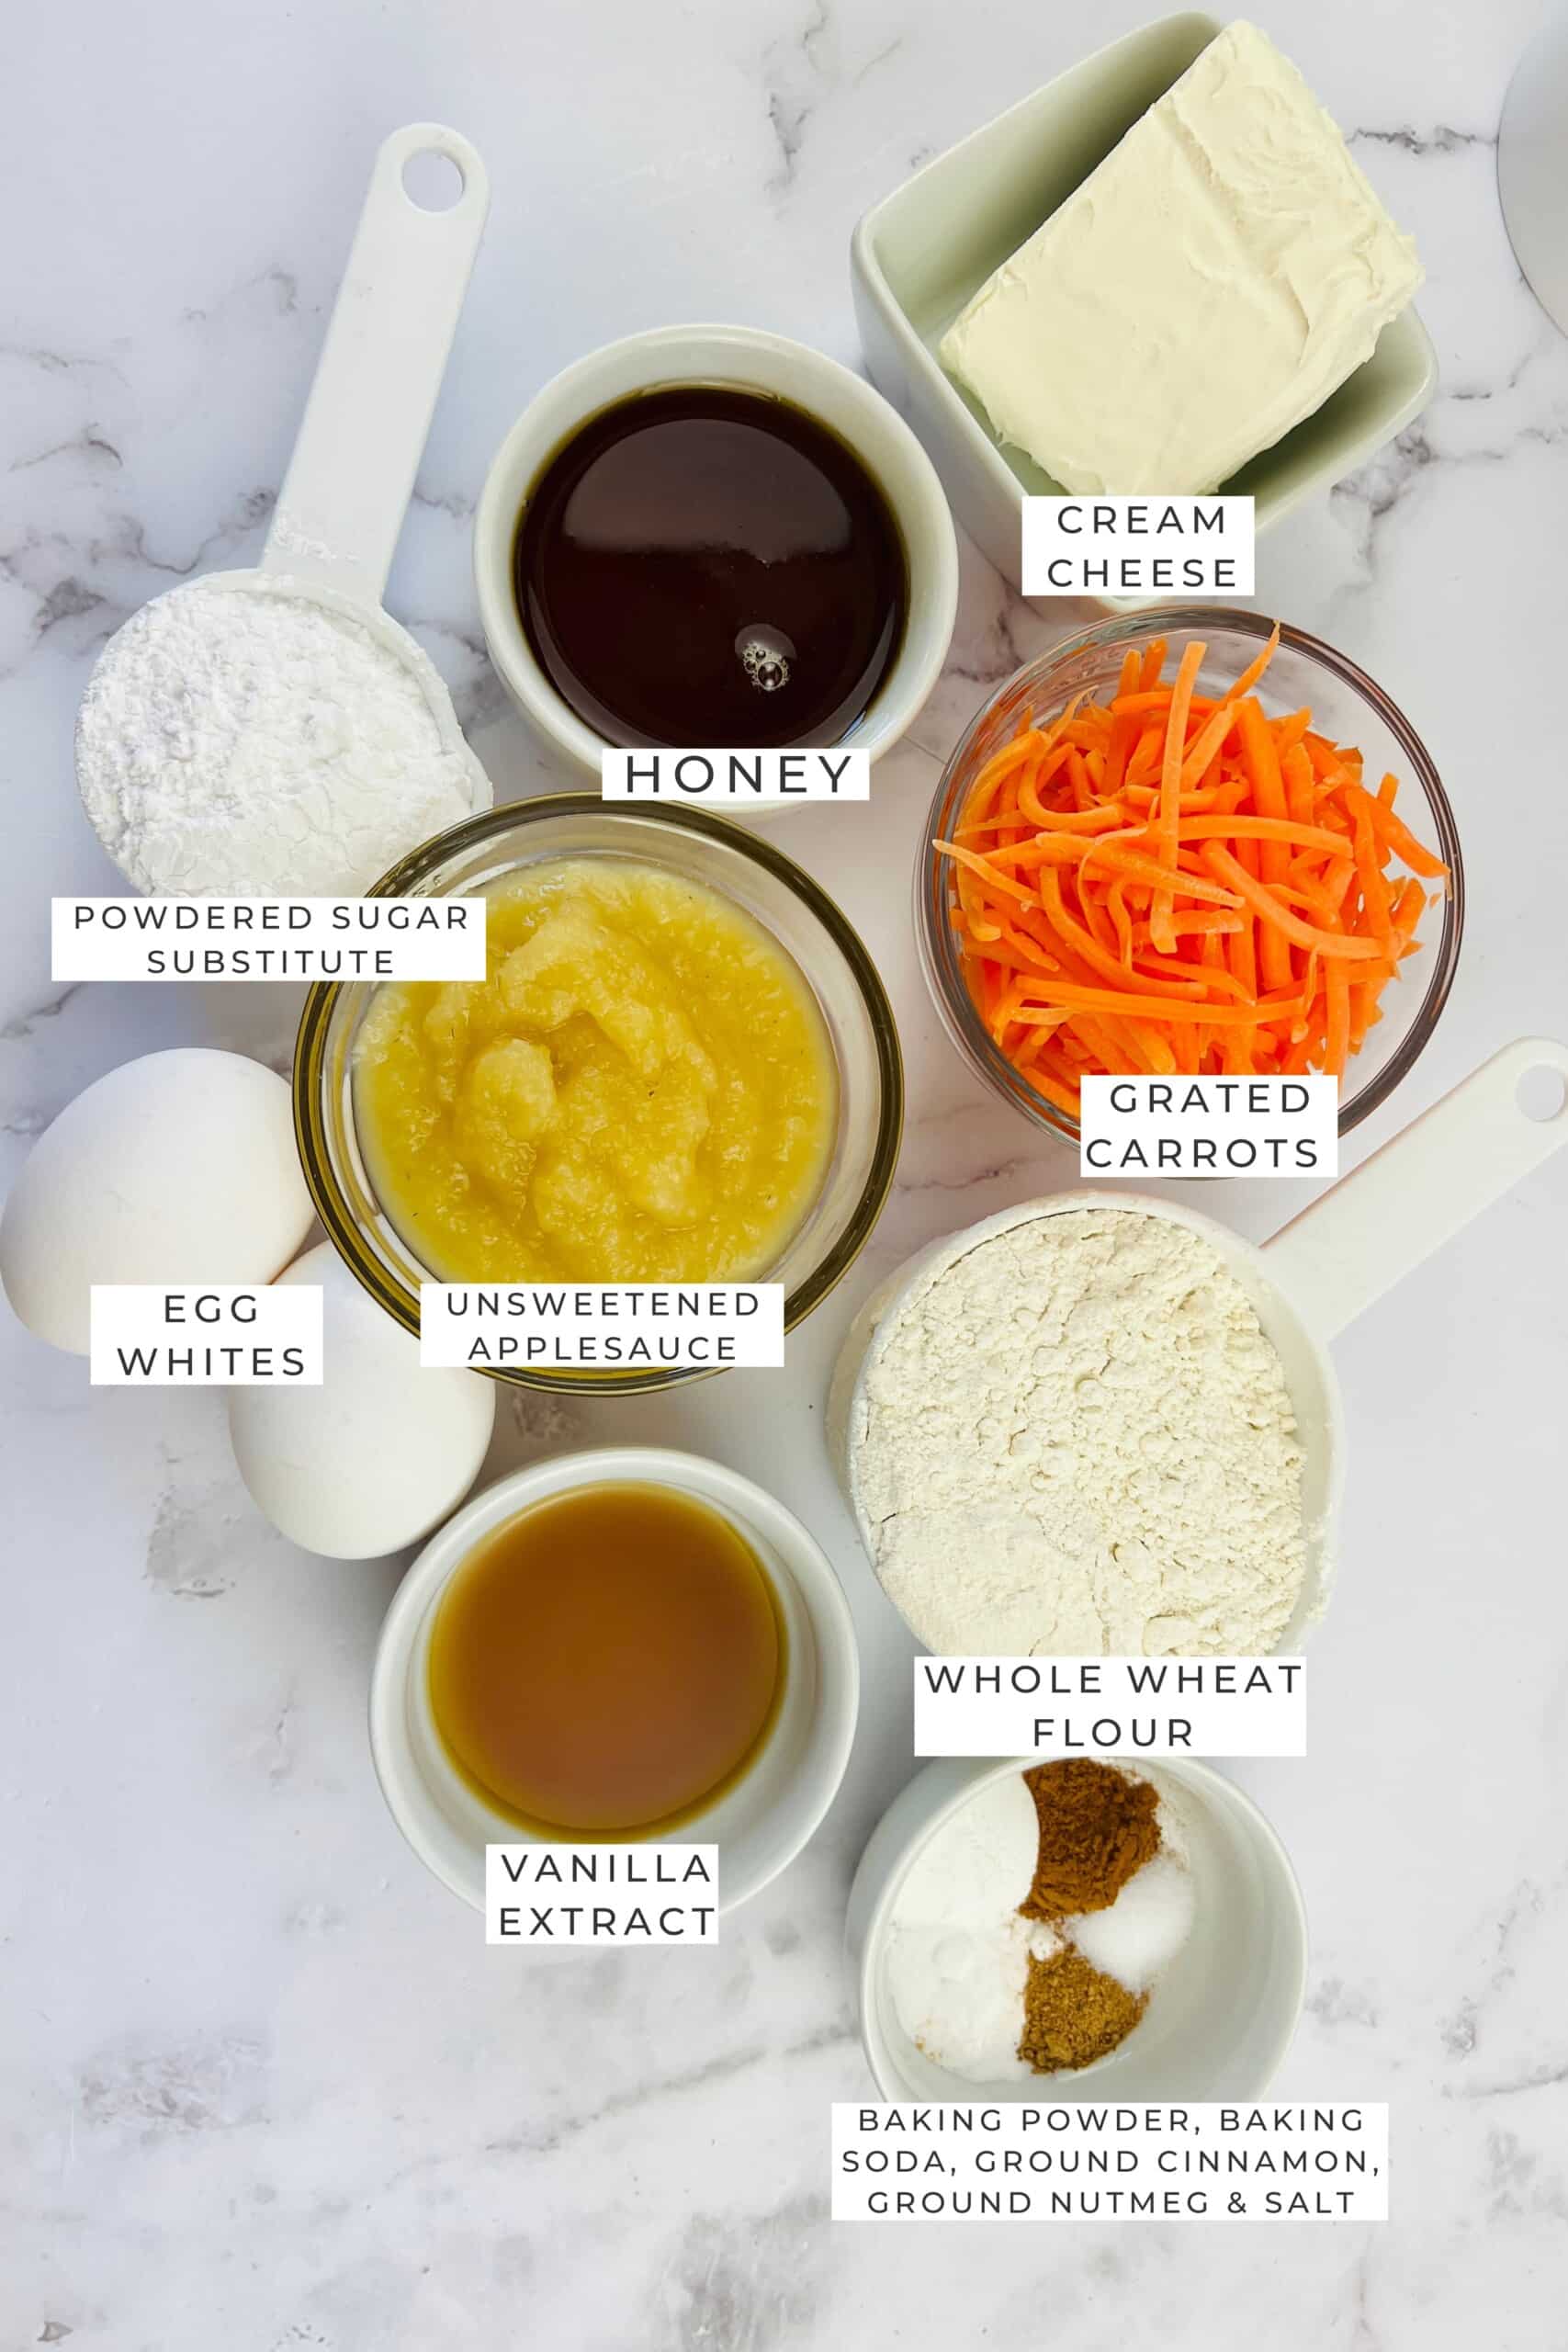 Labeled ingredients for the carrot cake.